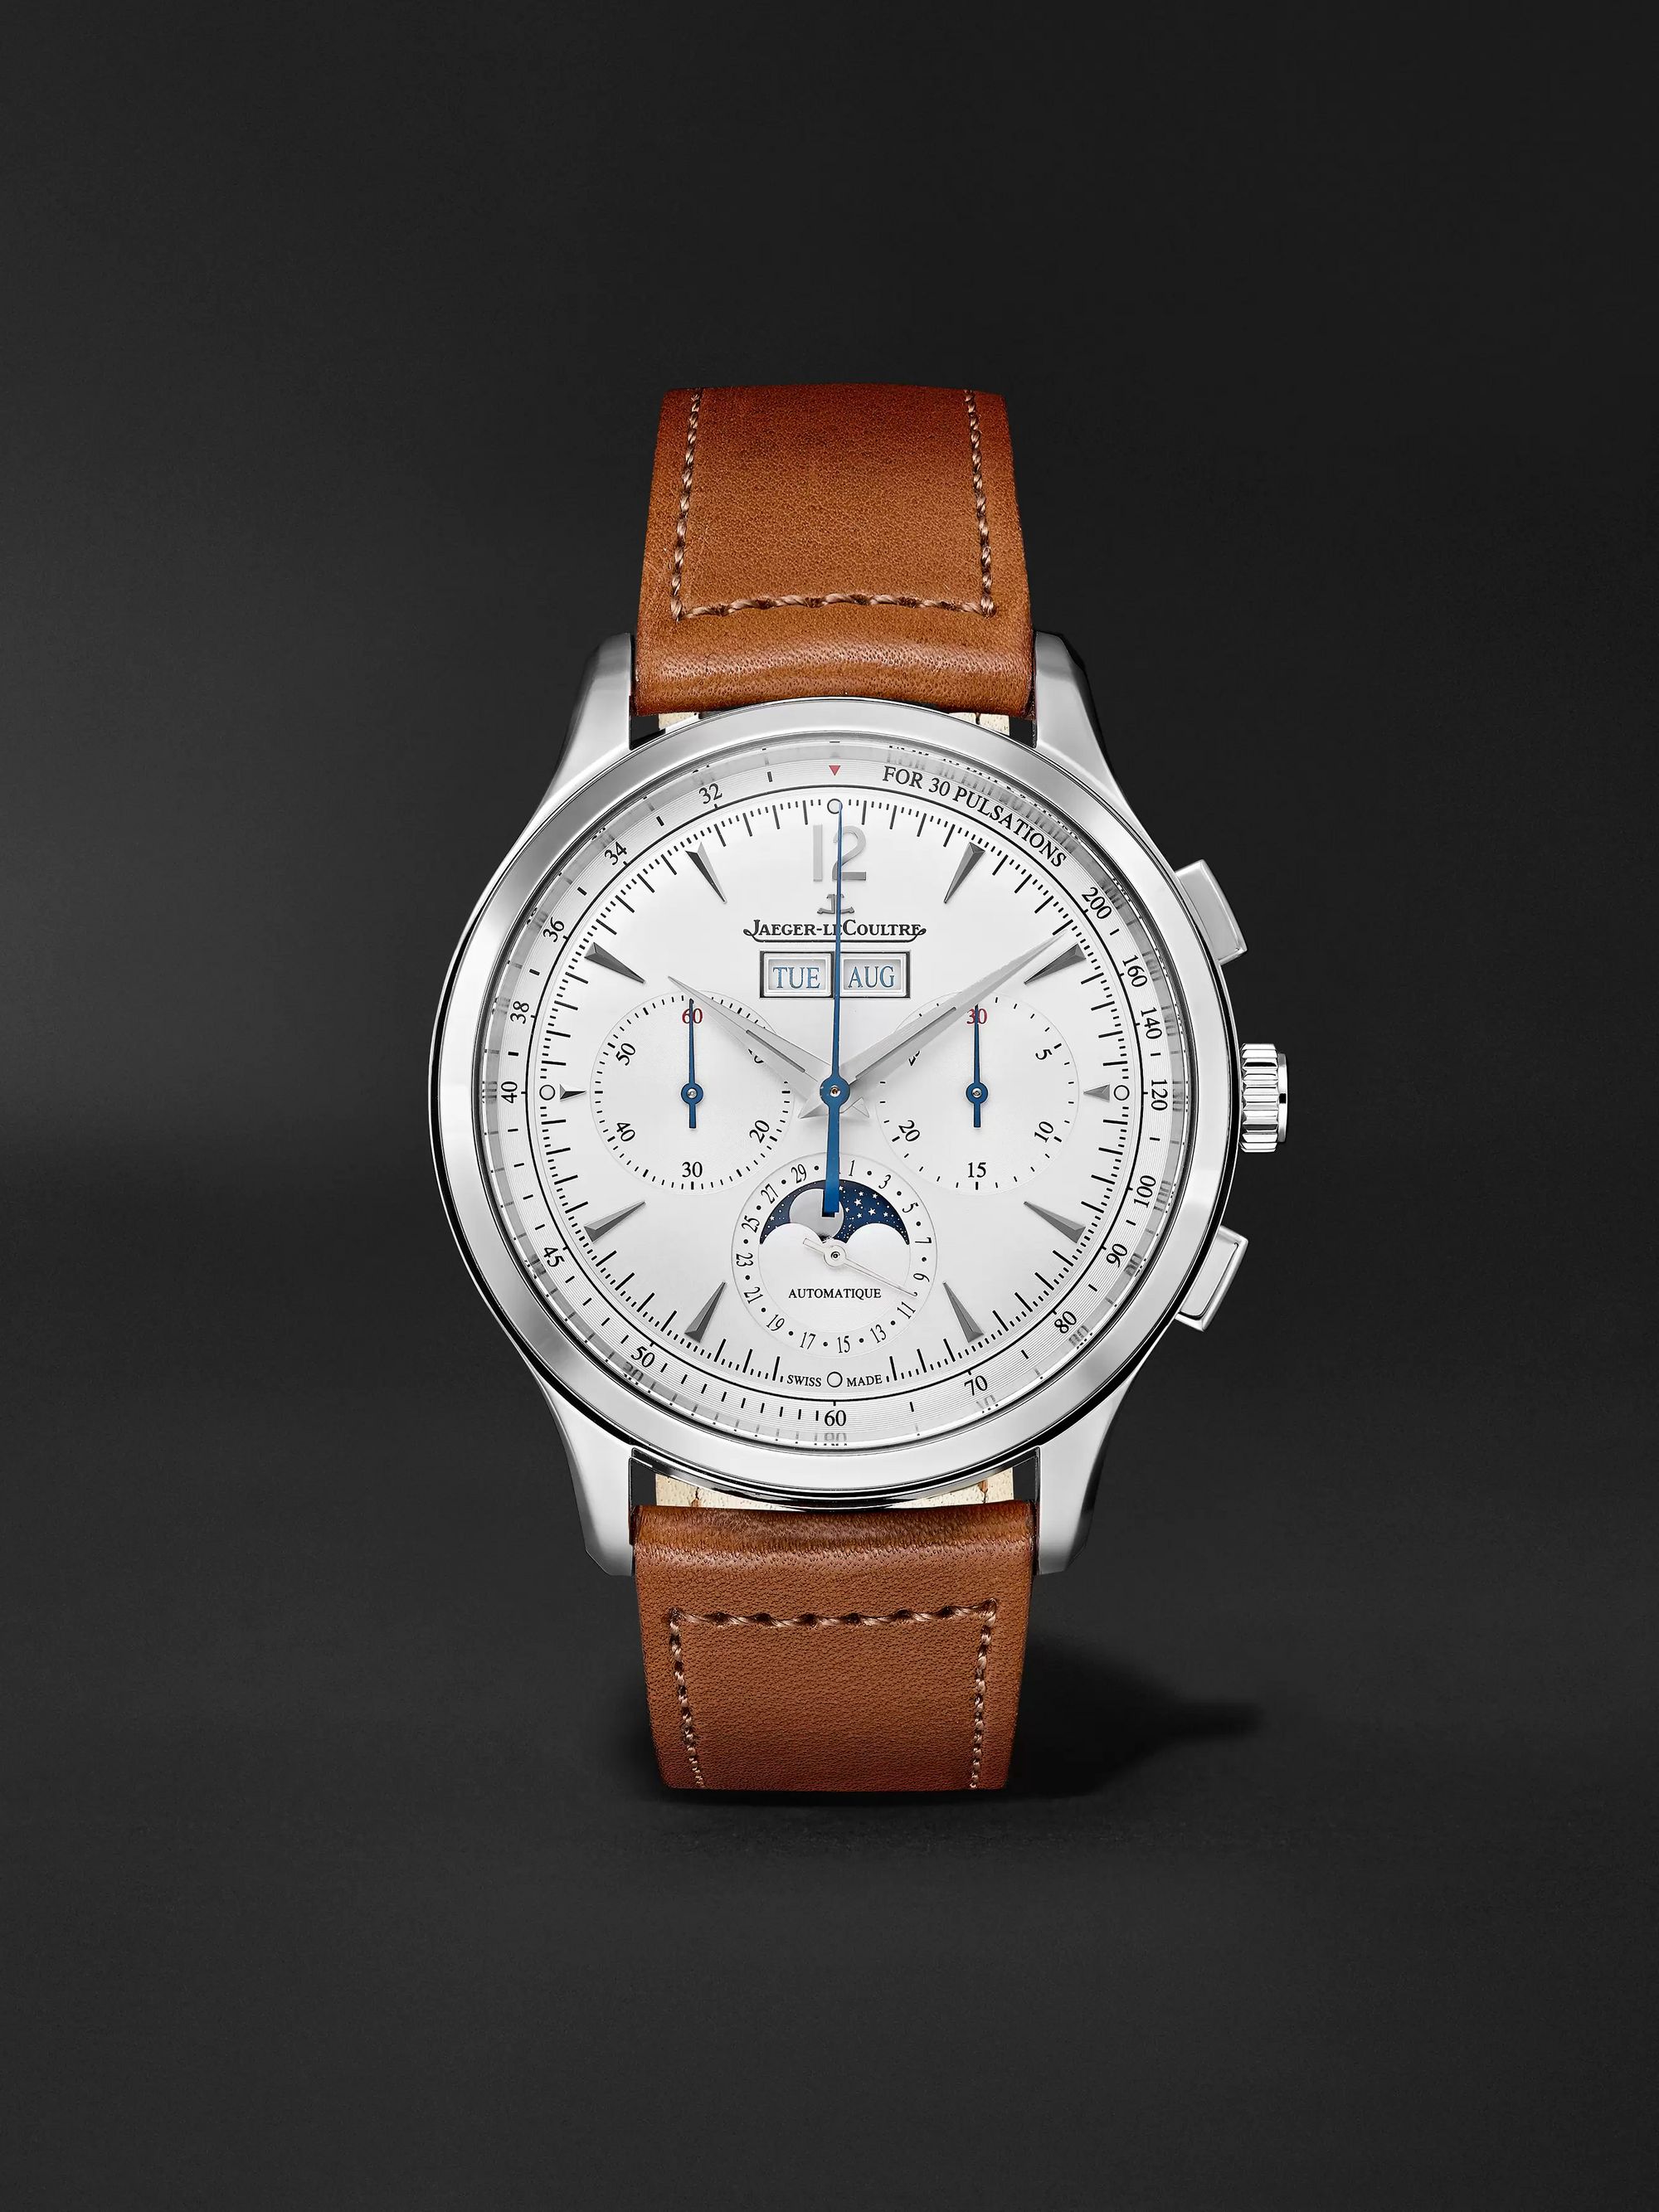 JAEGER-LECOULTRE Master Control Calendar Automatic Chronograph 40mm Stainless Steel and Leather Watch, Ref No. 4138420